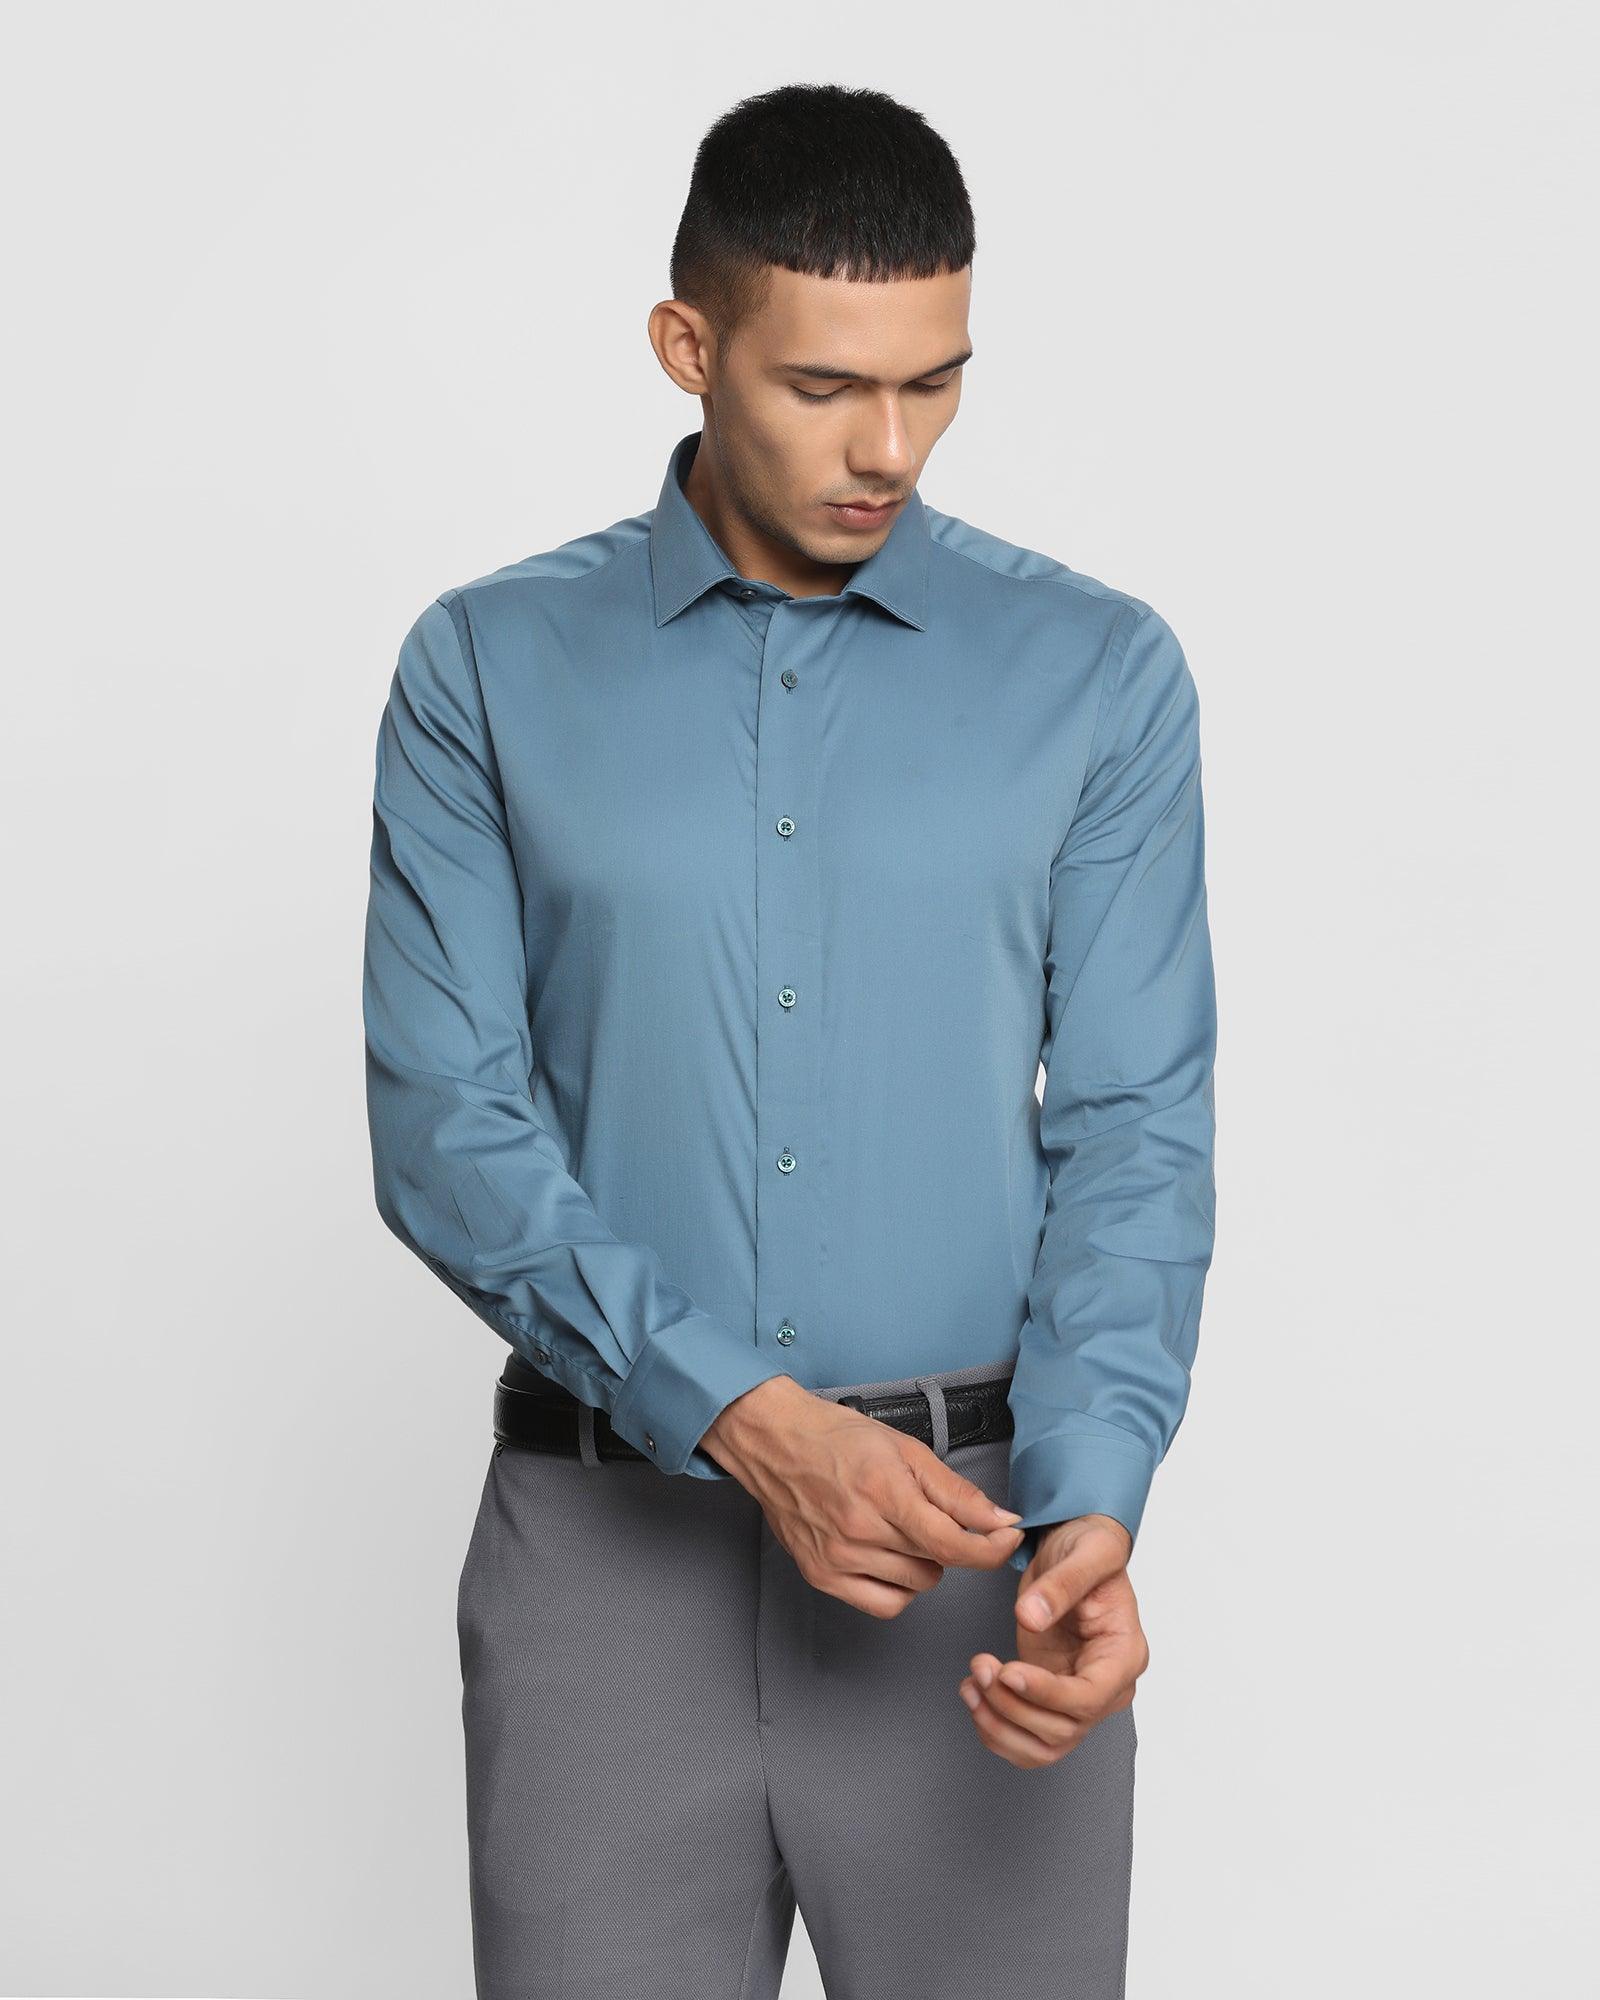 TechPro Formal Teal Solid Shirt - Neil